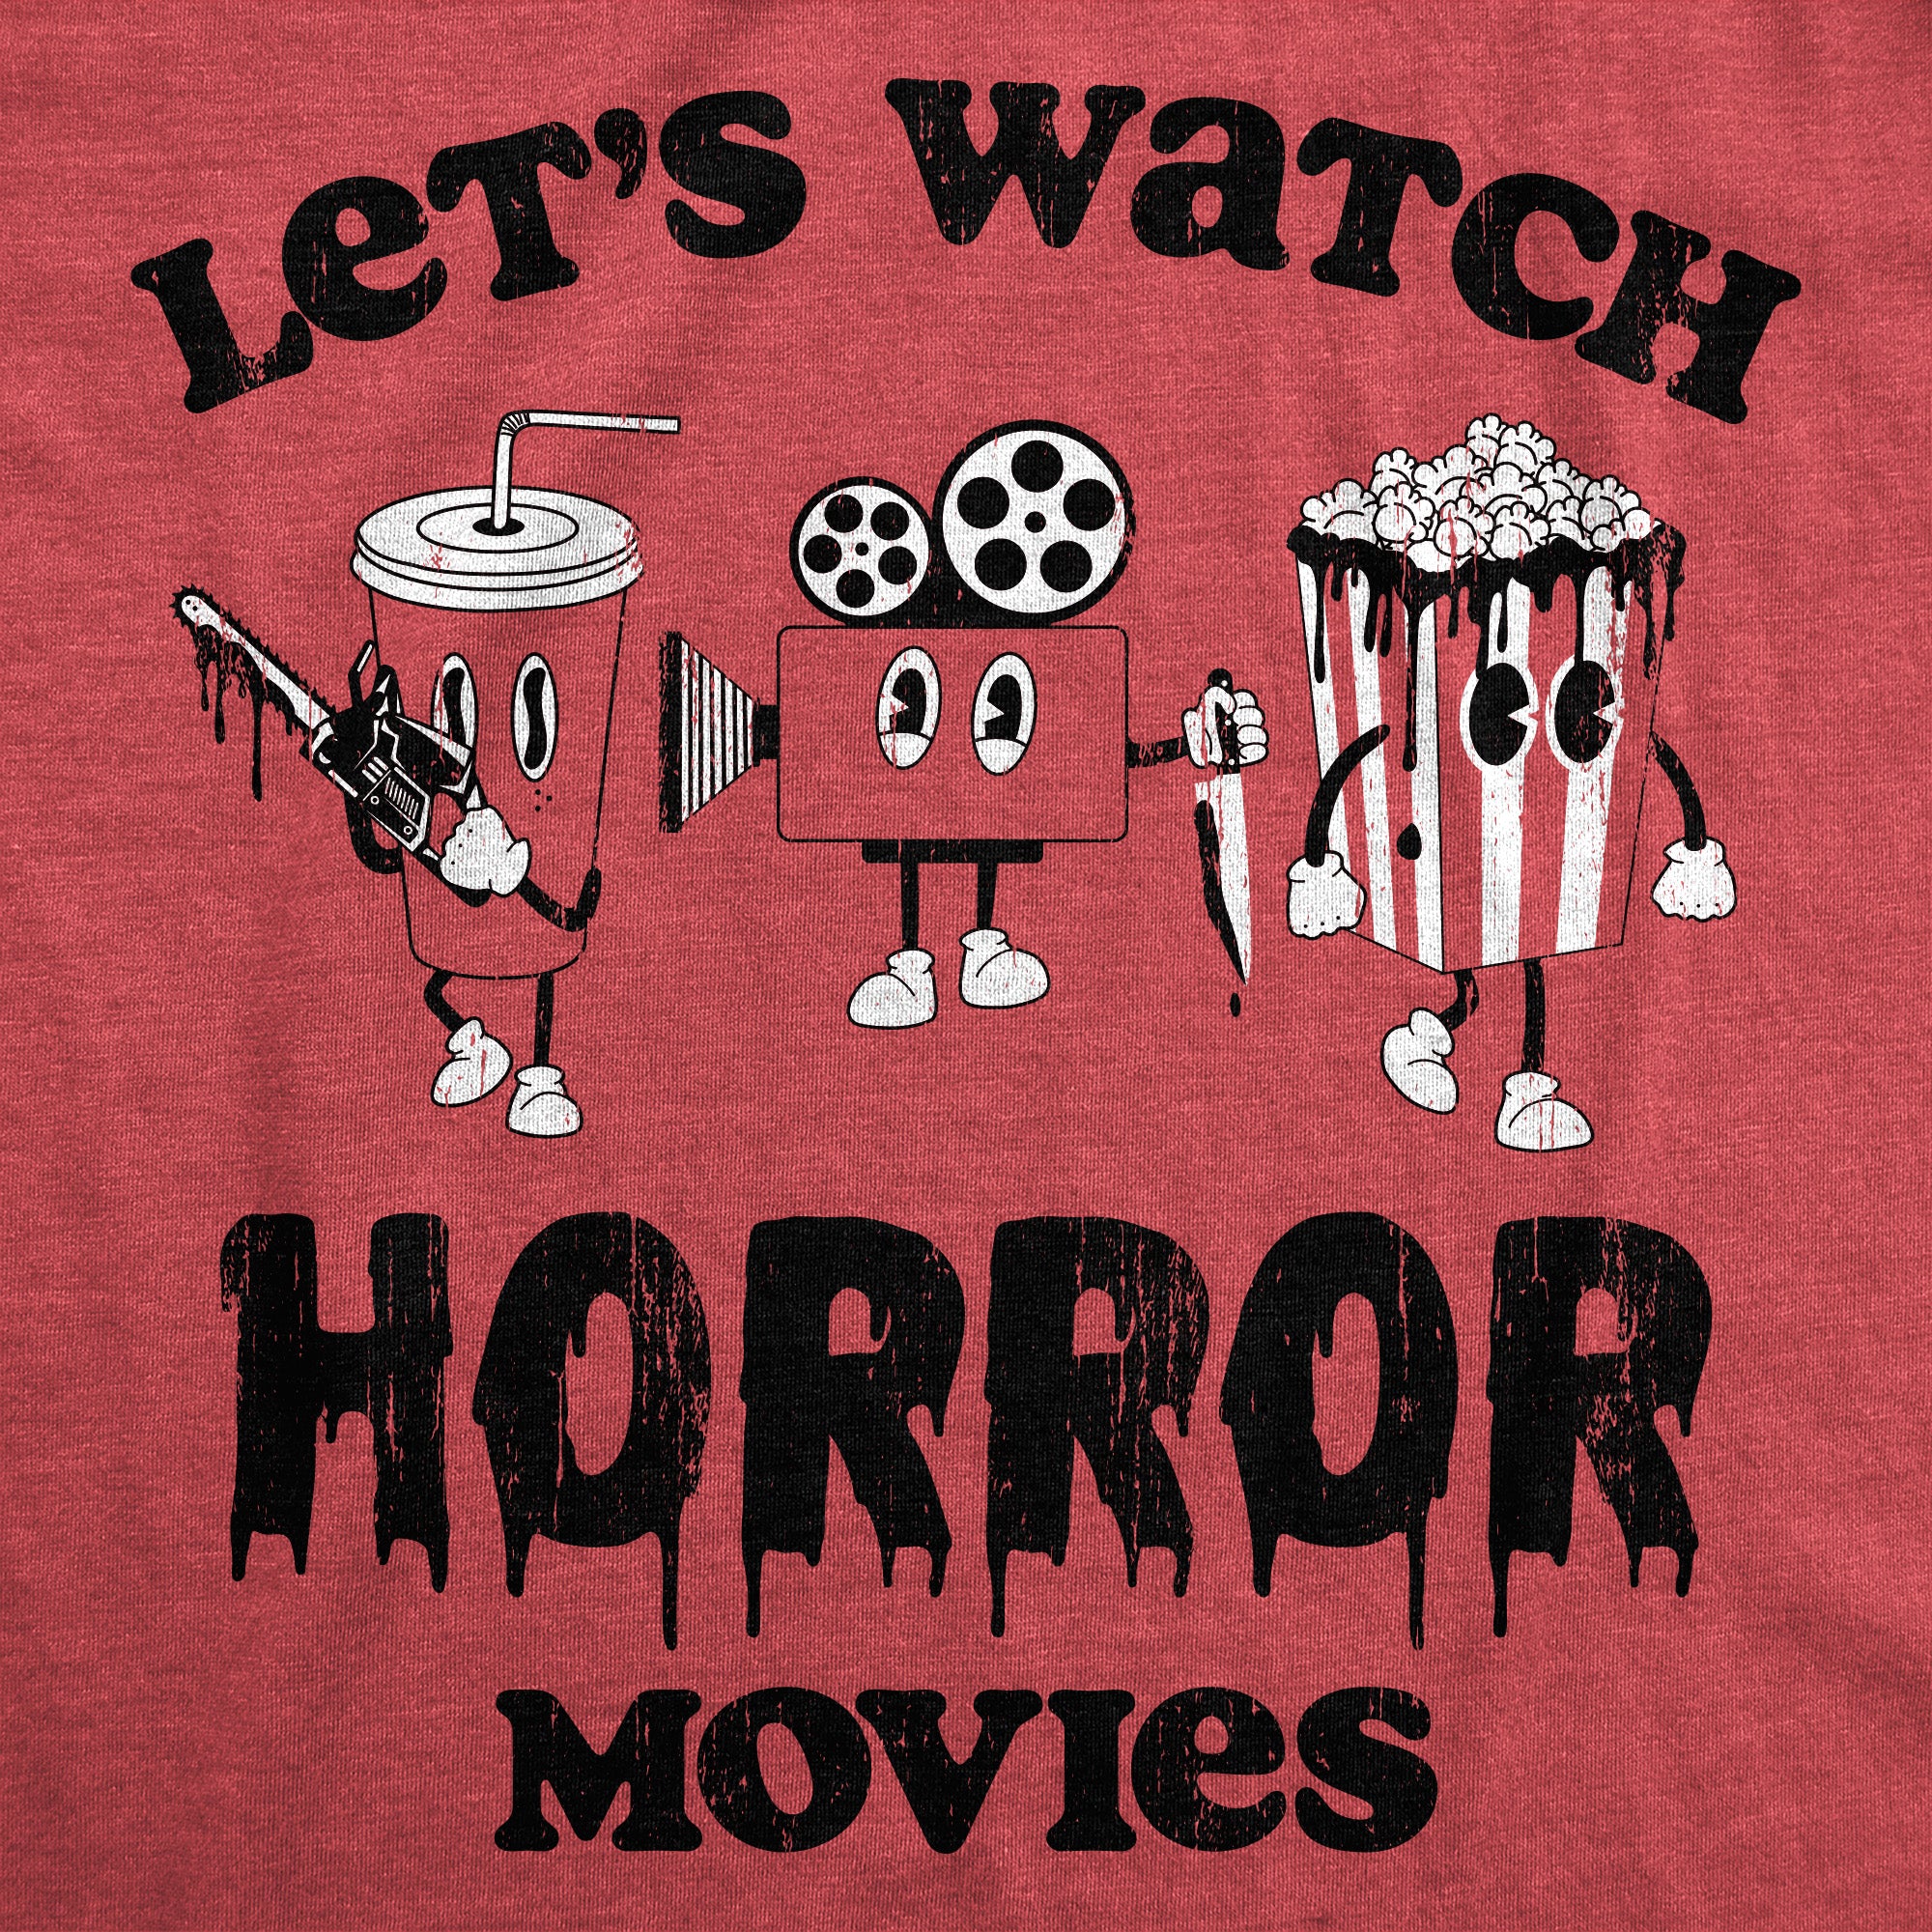 Funny Heather Red - HORROR Lets Watch Horror Movies Mens T Shirt Nerdy TV & Movies Tee